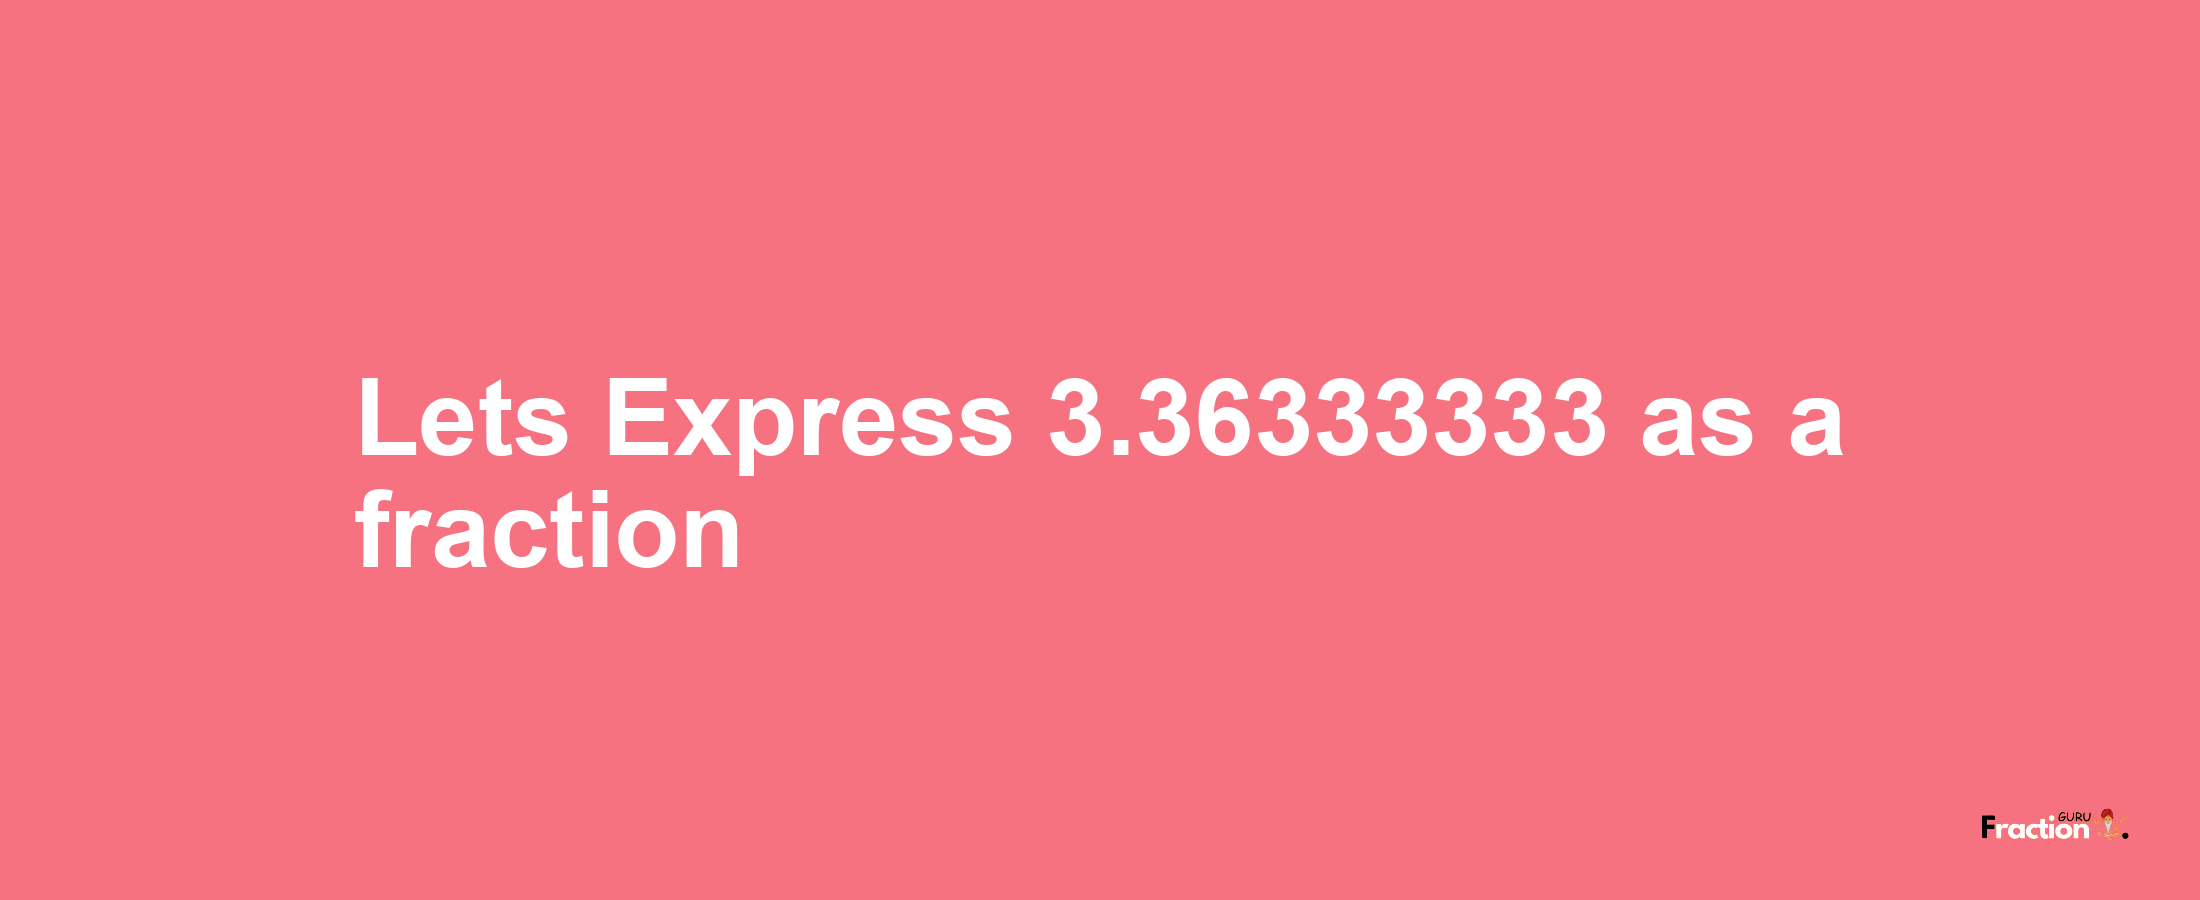 Lets Express 3.36333333 as afraction